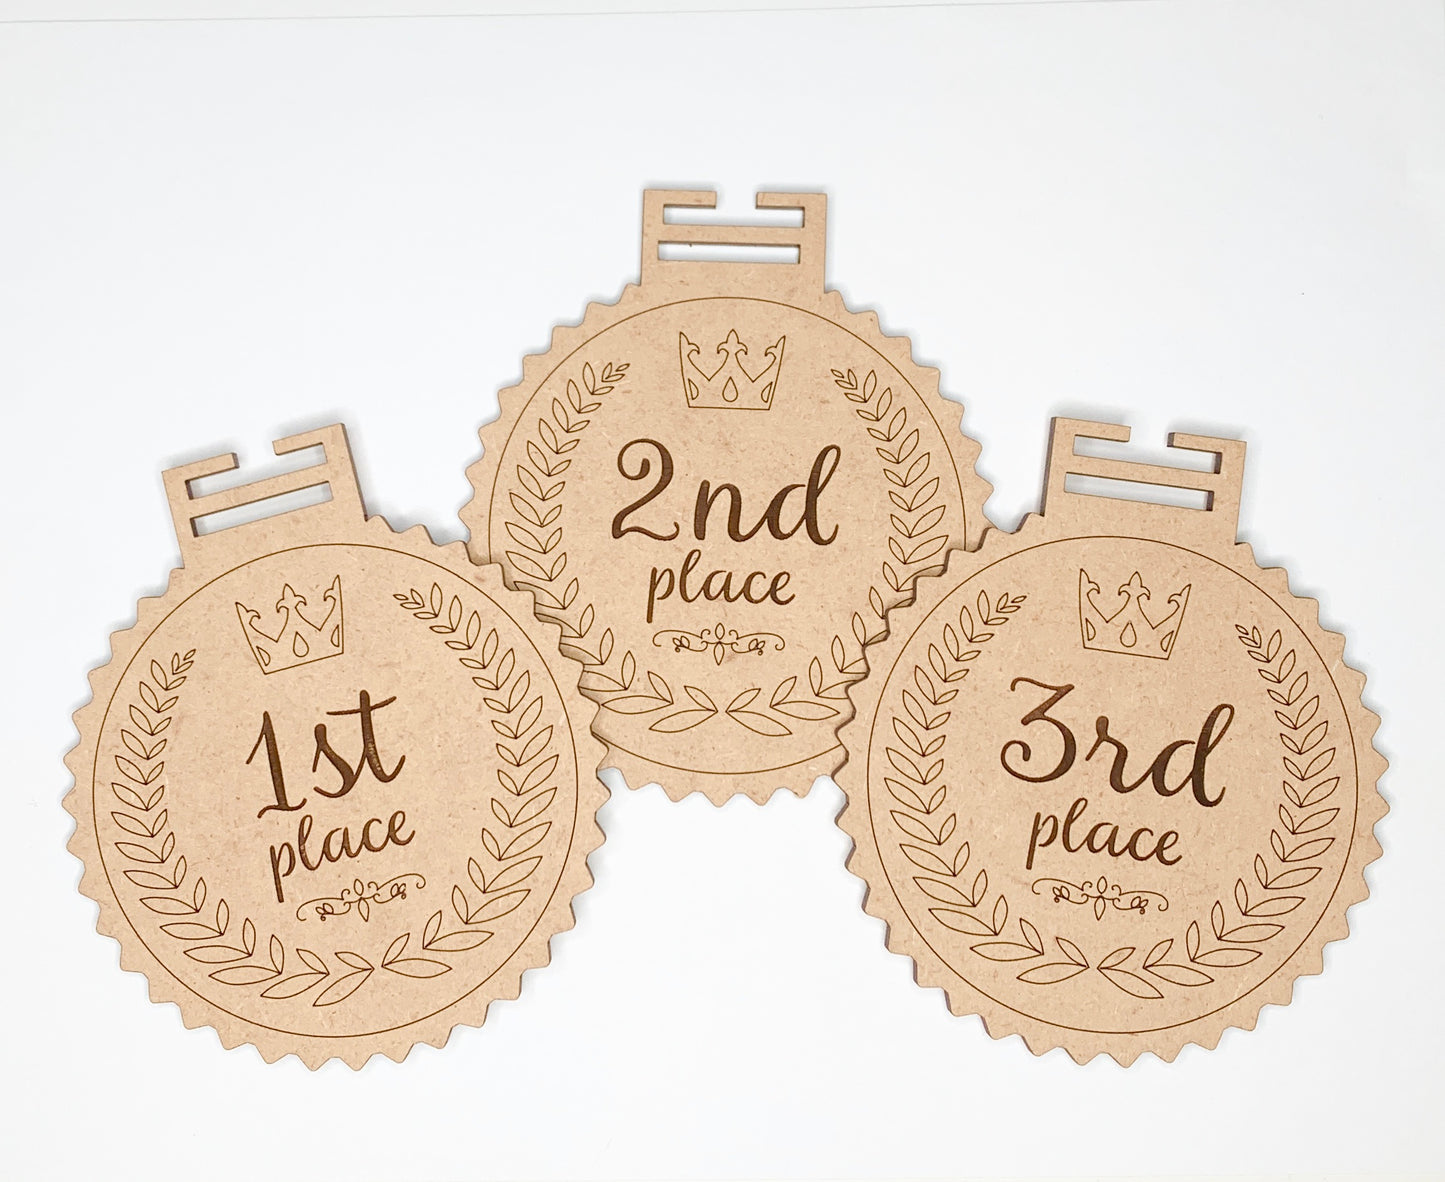 Award Medallions - 1st, 2nd, 3rd Place Medals